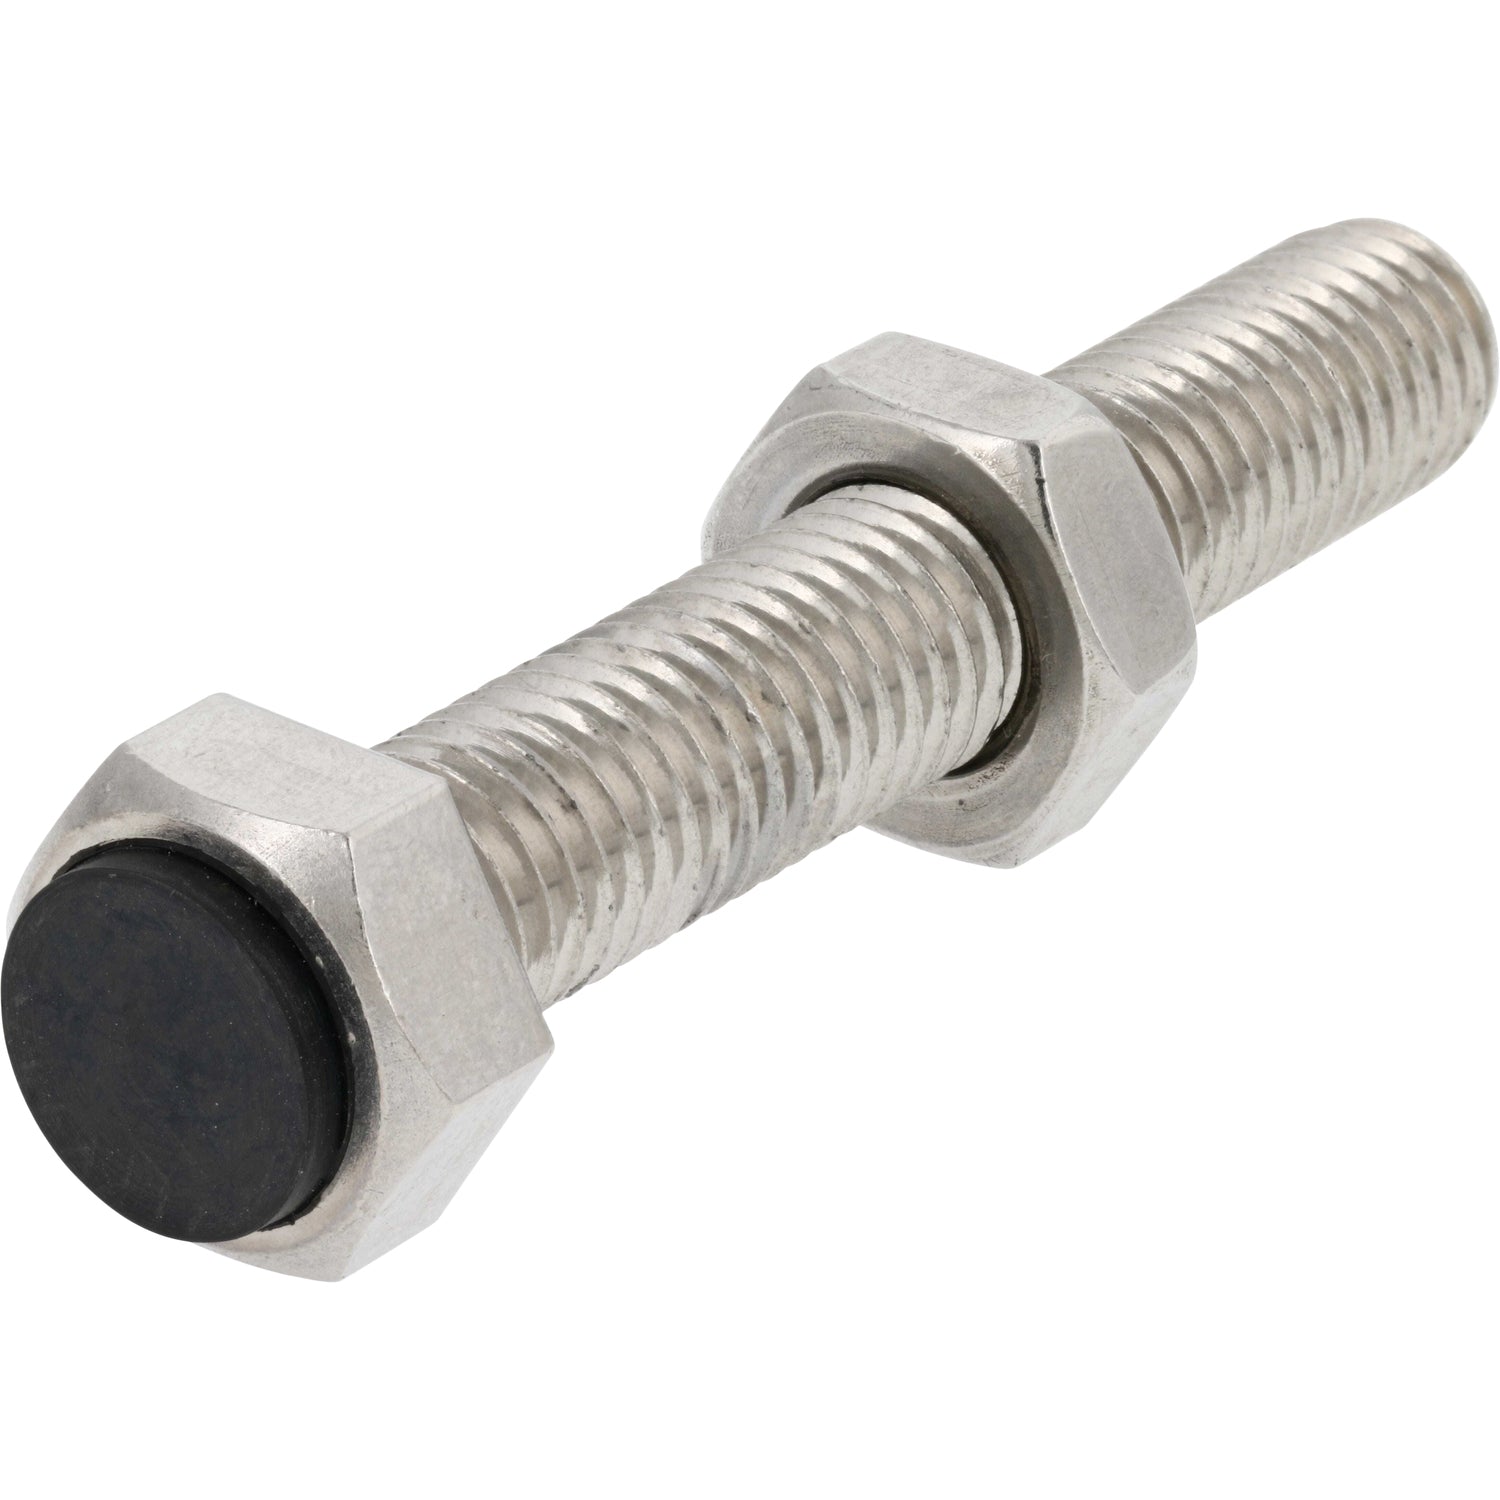 Stainless Steel stopper bold with hex nut and black rubber stopper on white background. 